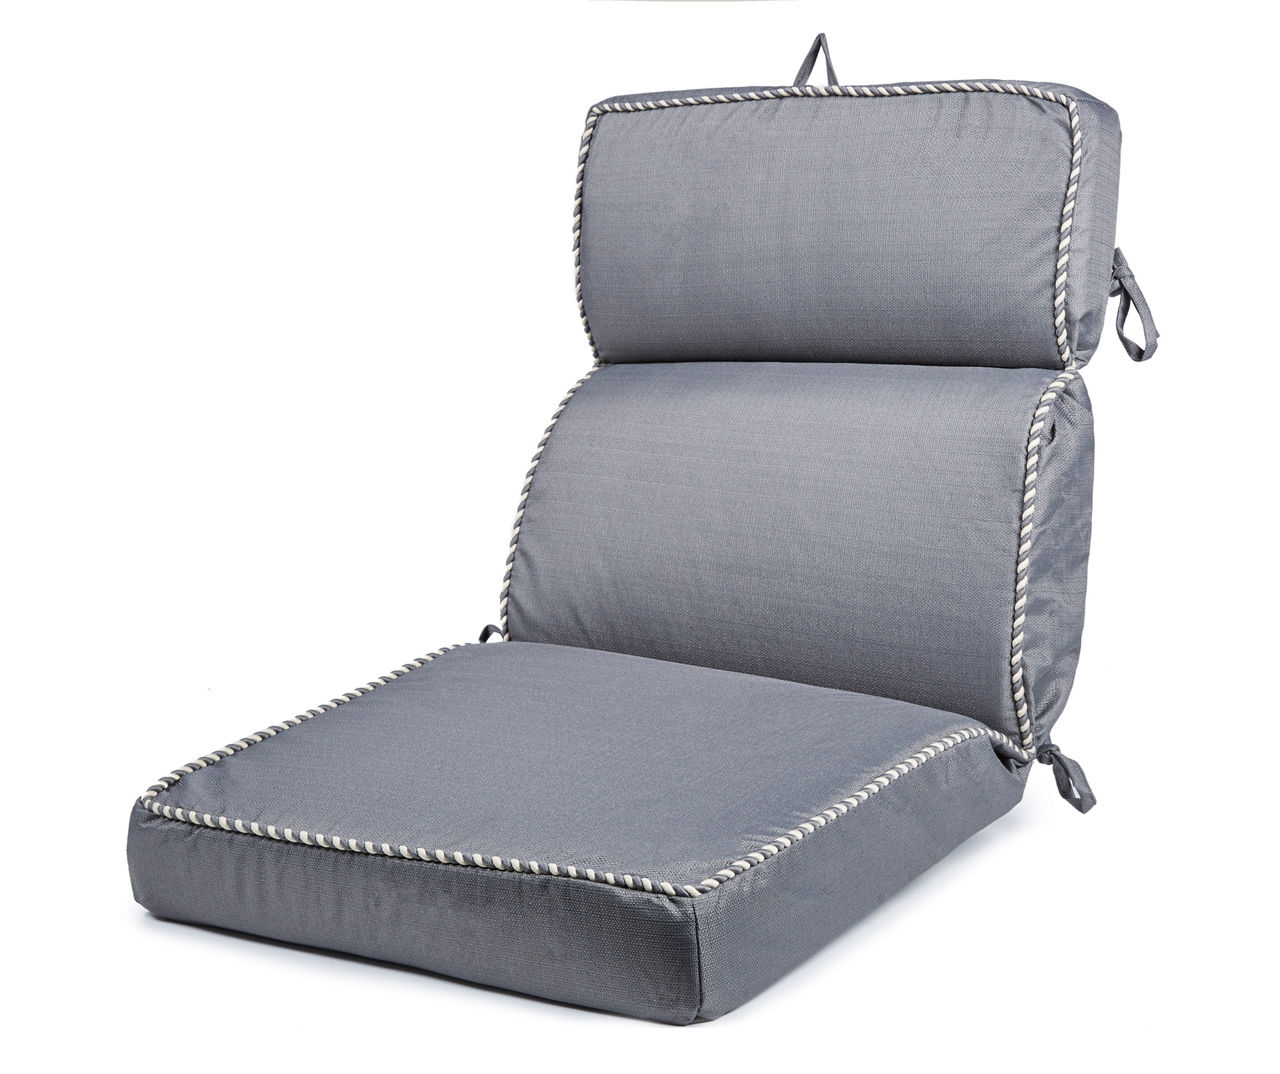 YouLoveIt Outdoor Chair Cushion High Back Solid Chair Cushion